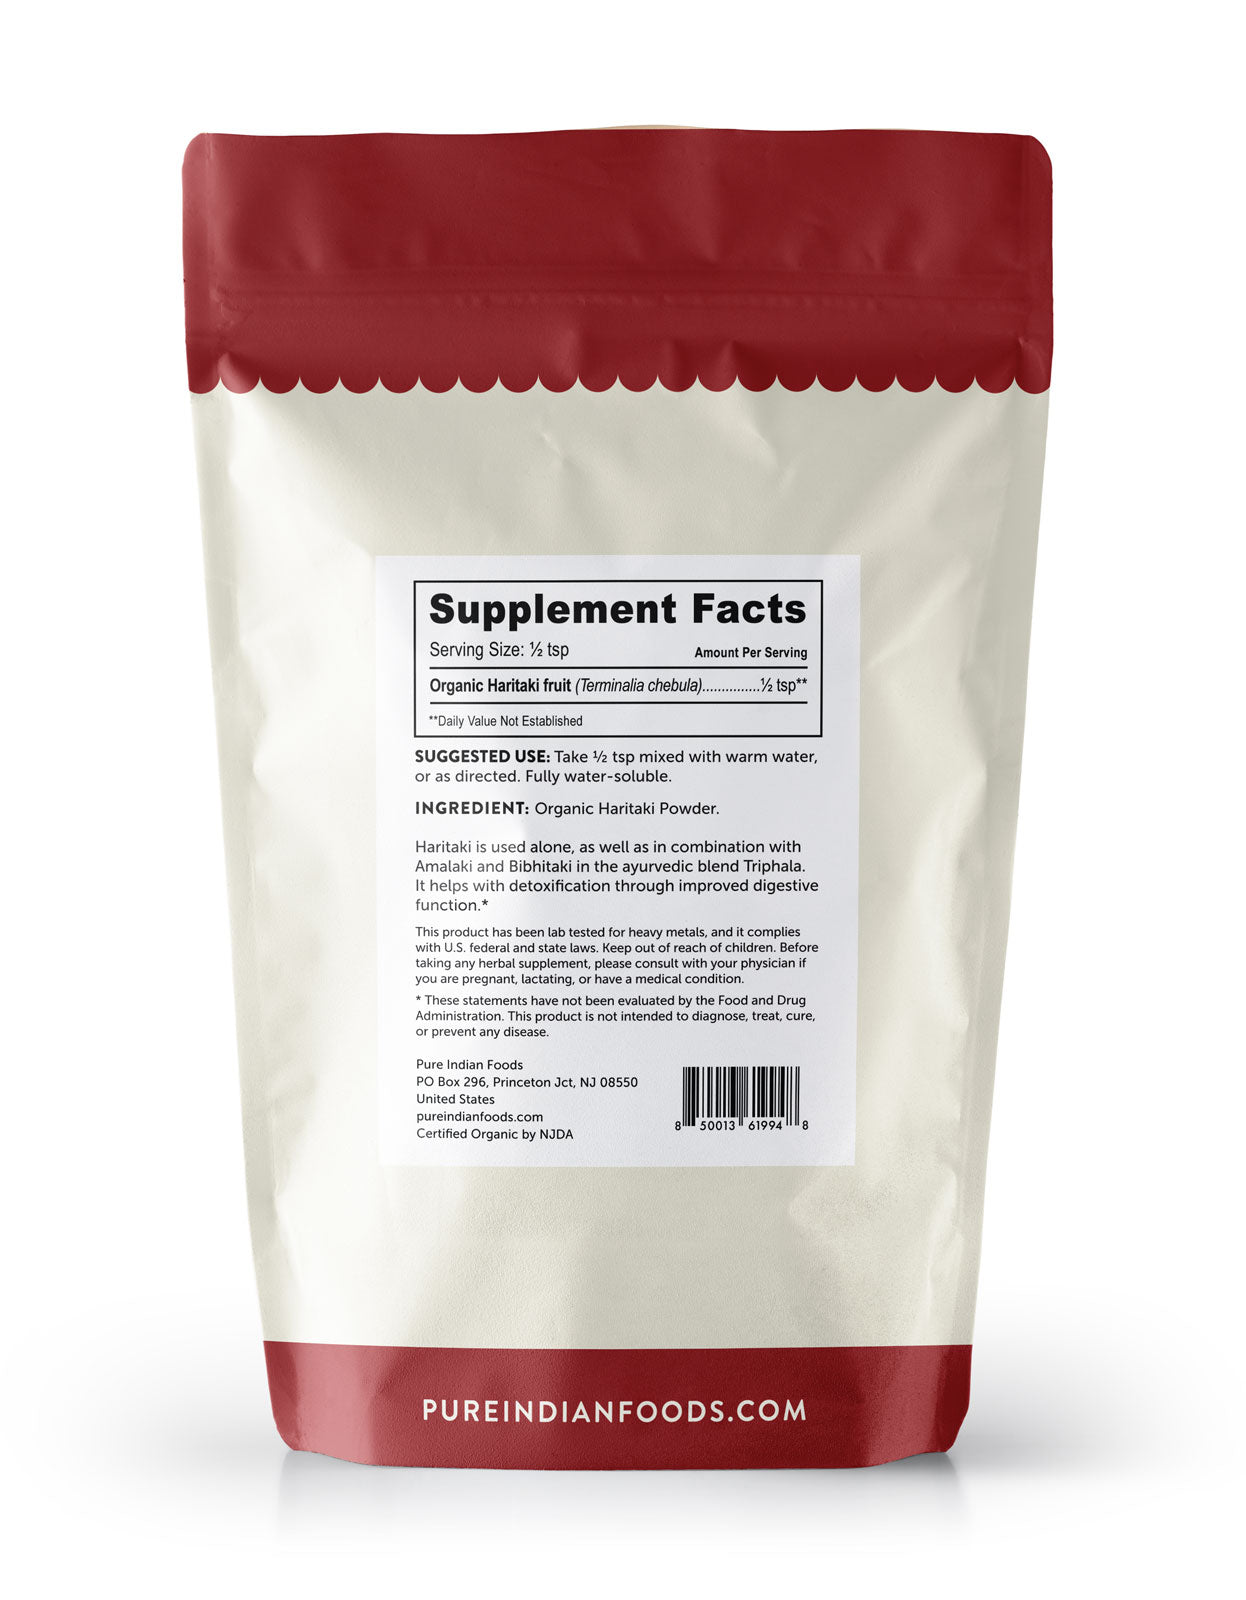 Supplement Facts label for a bag of Organic Haritaki Powder from Pure Indian Foods.